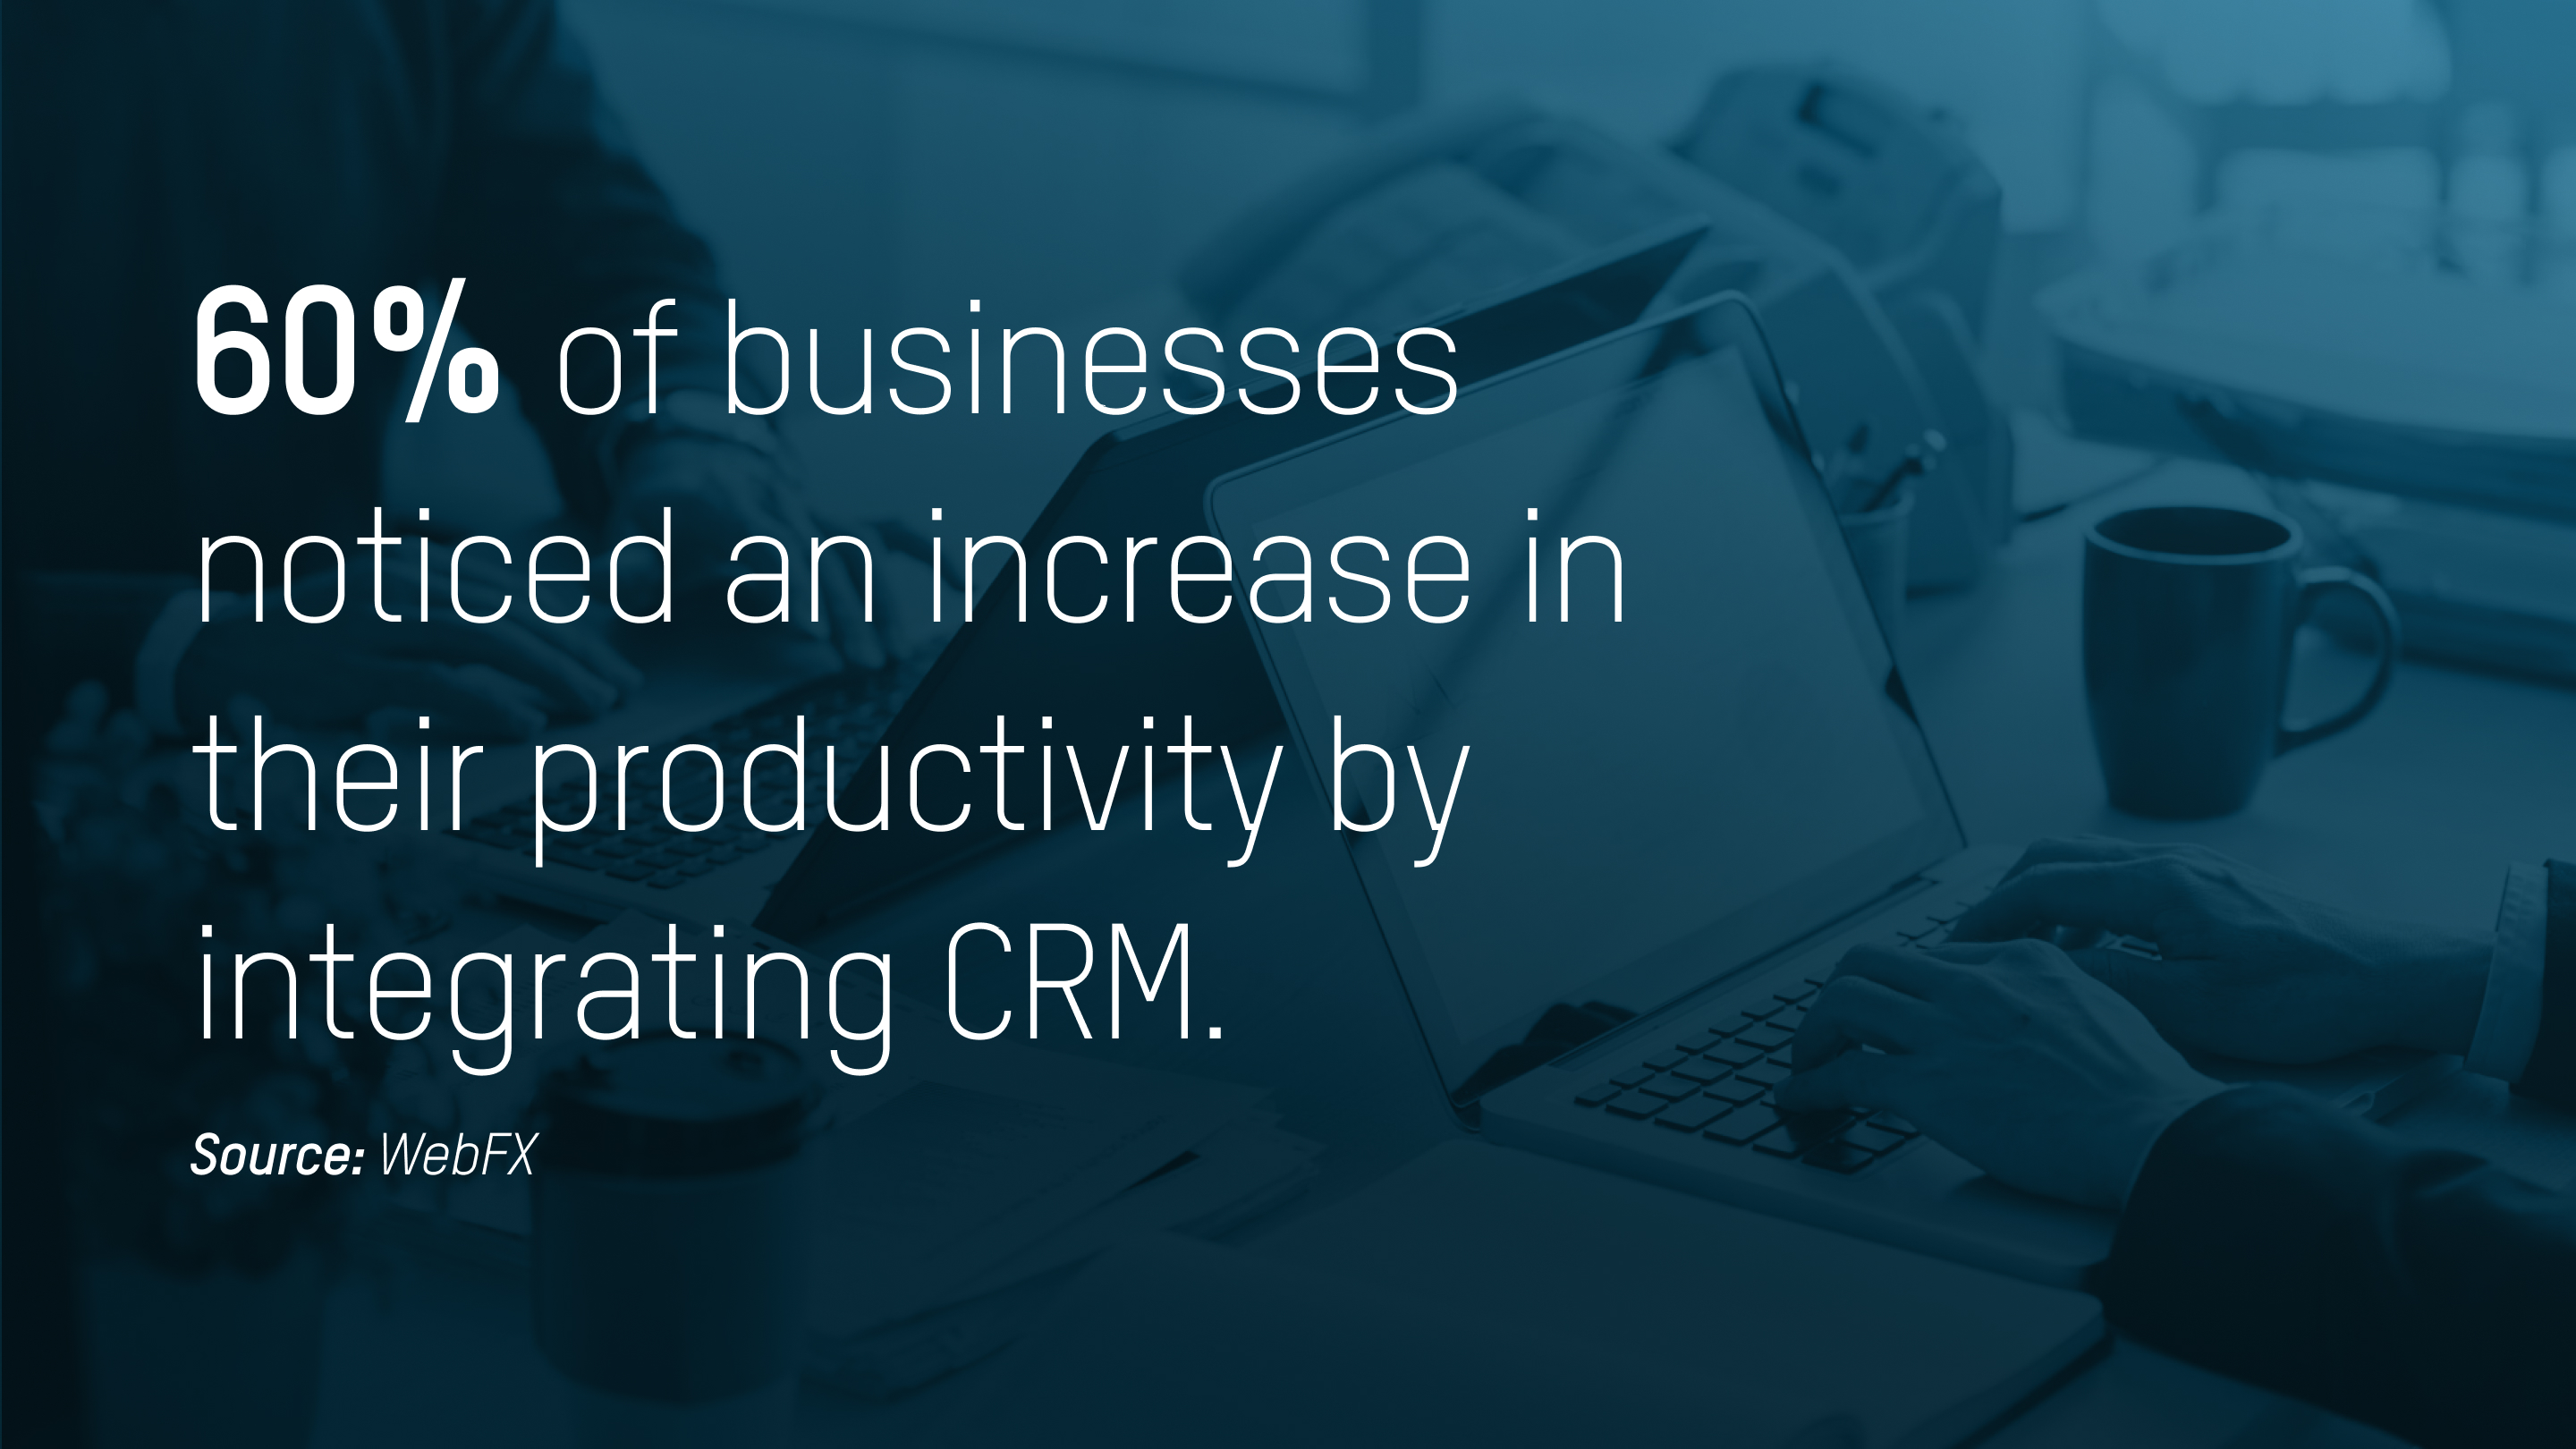 Businesses noticed an increase in their productivity by integrating CRM